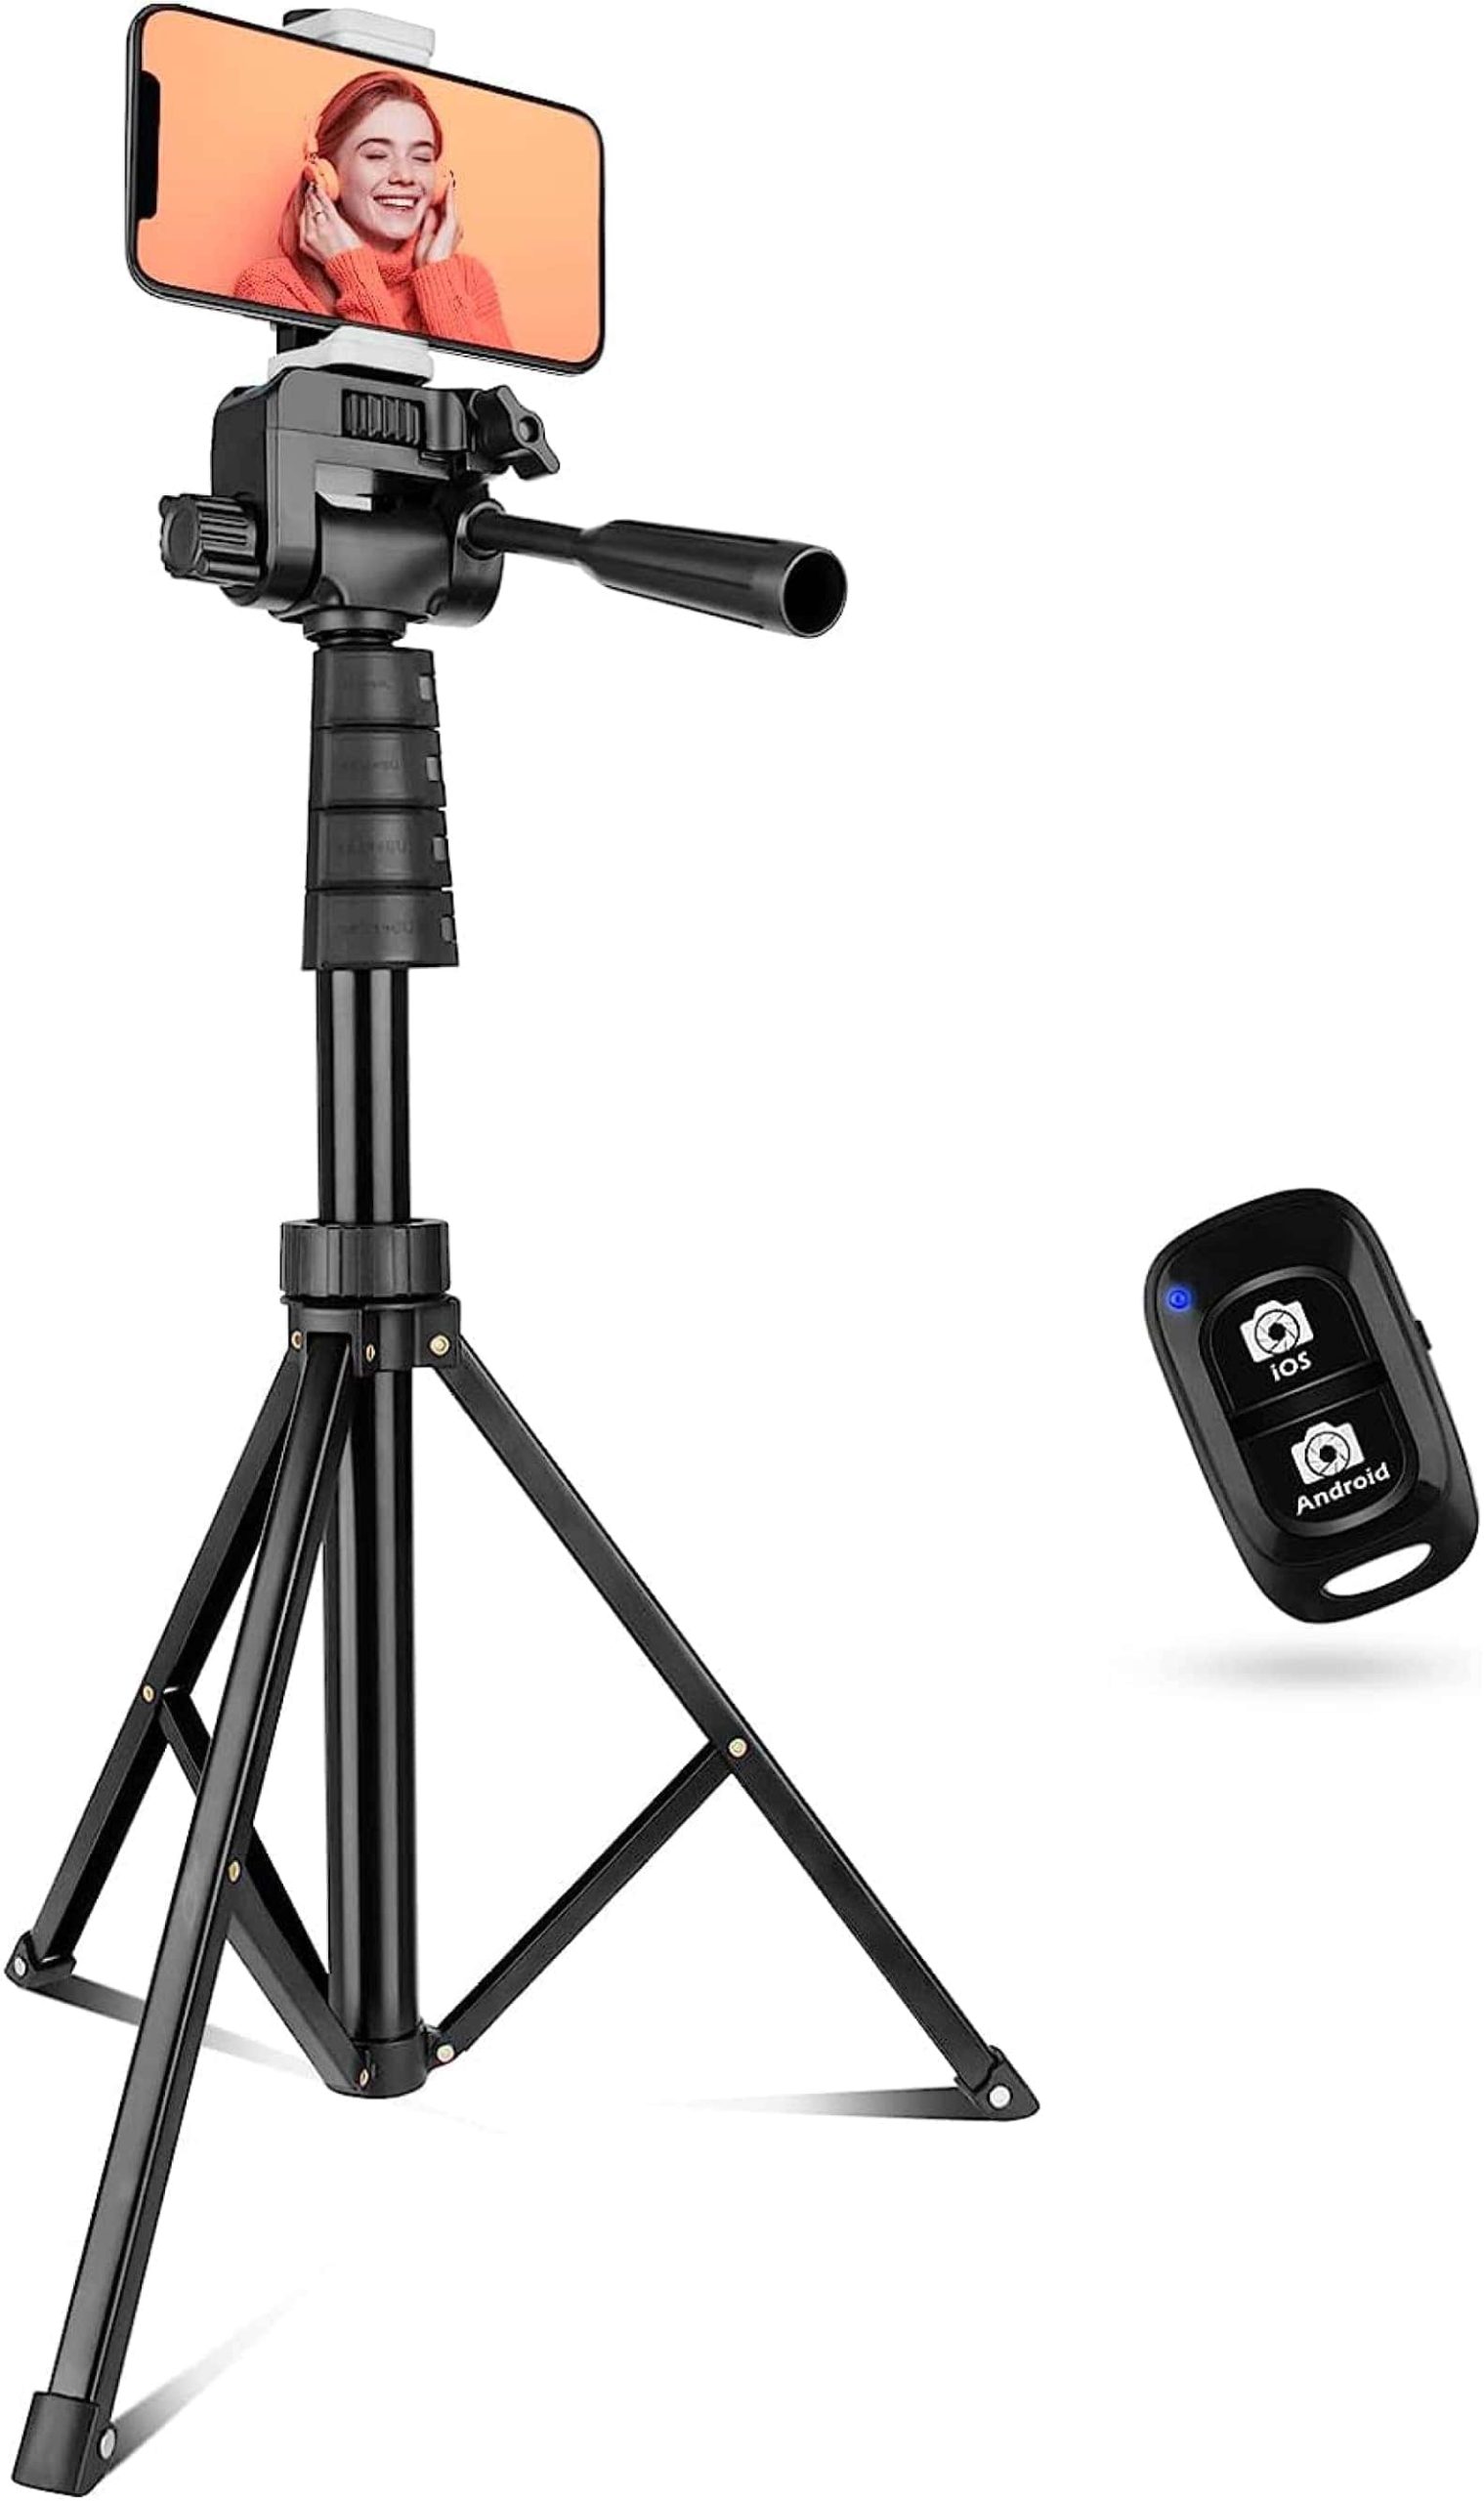 phone on tripod with remote